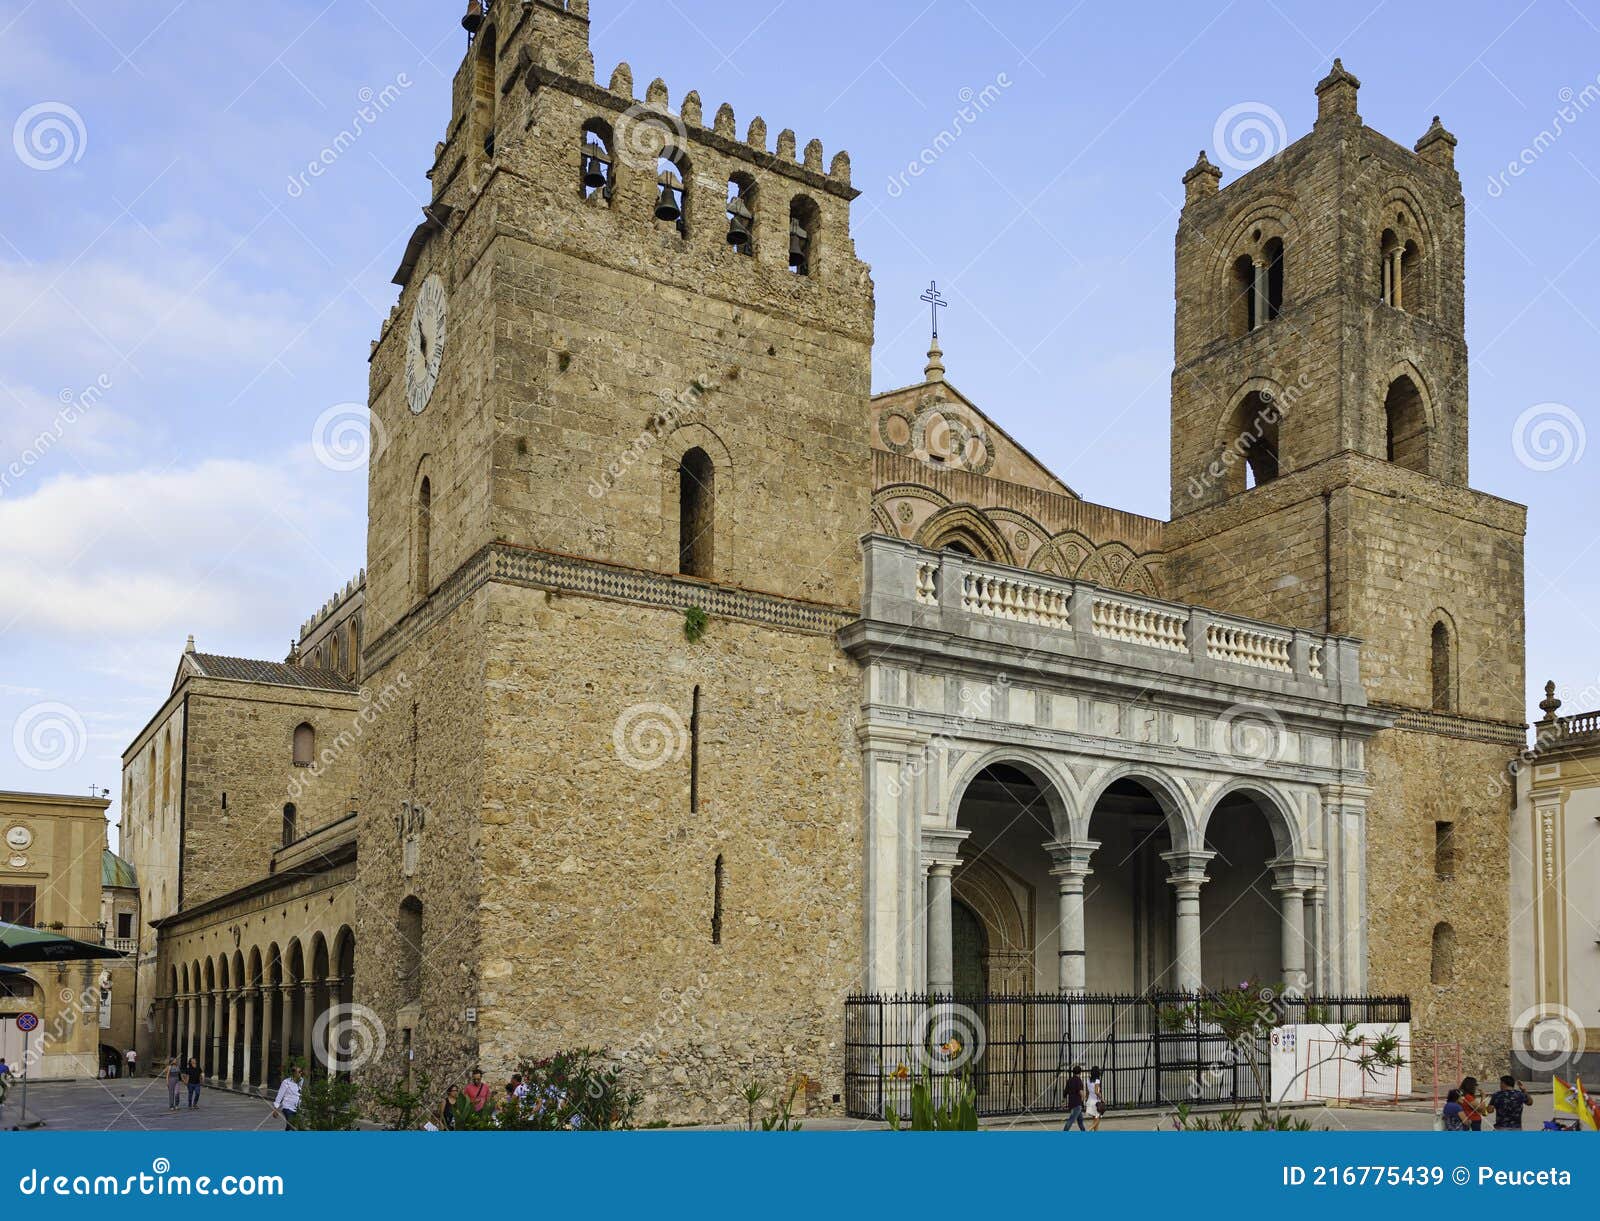 the cathedral of monreale, is one of the greatest extent examples of norman architecture